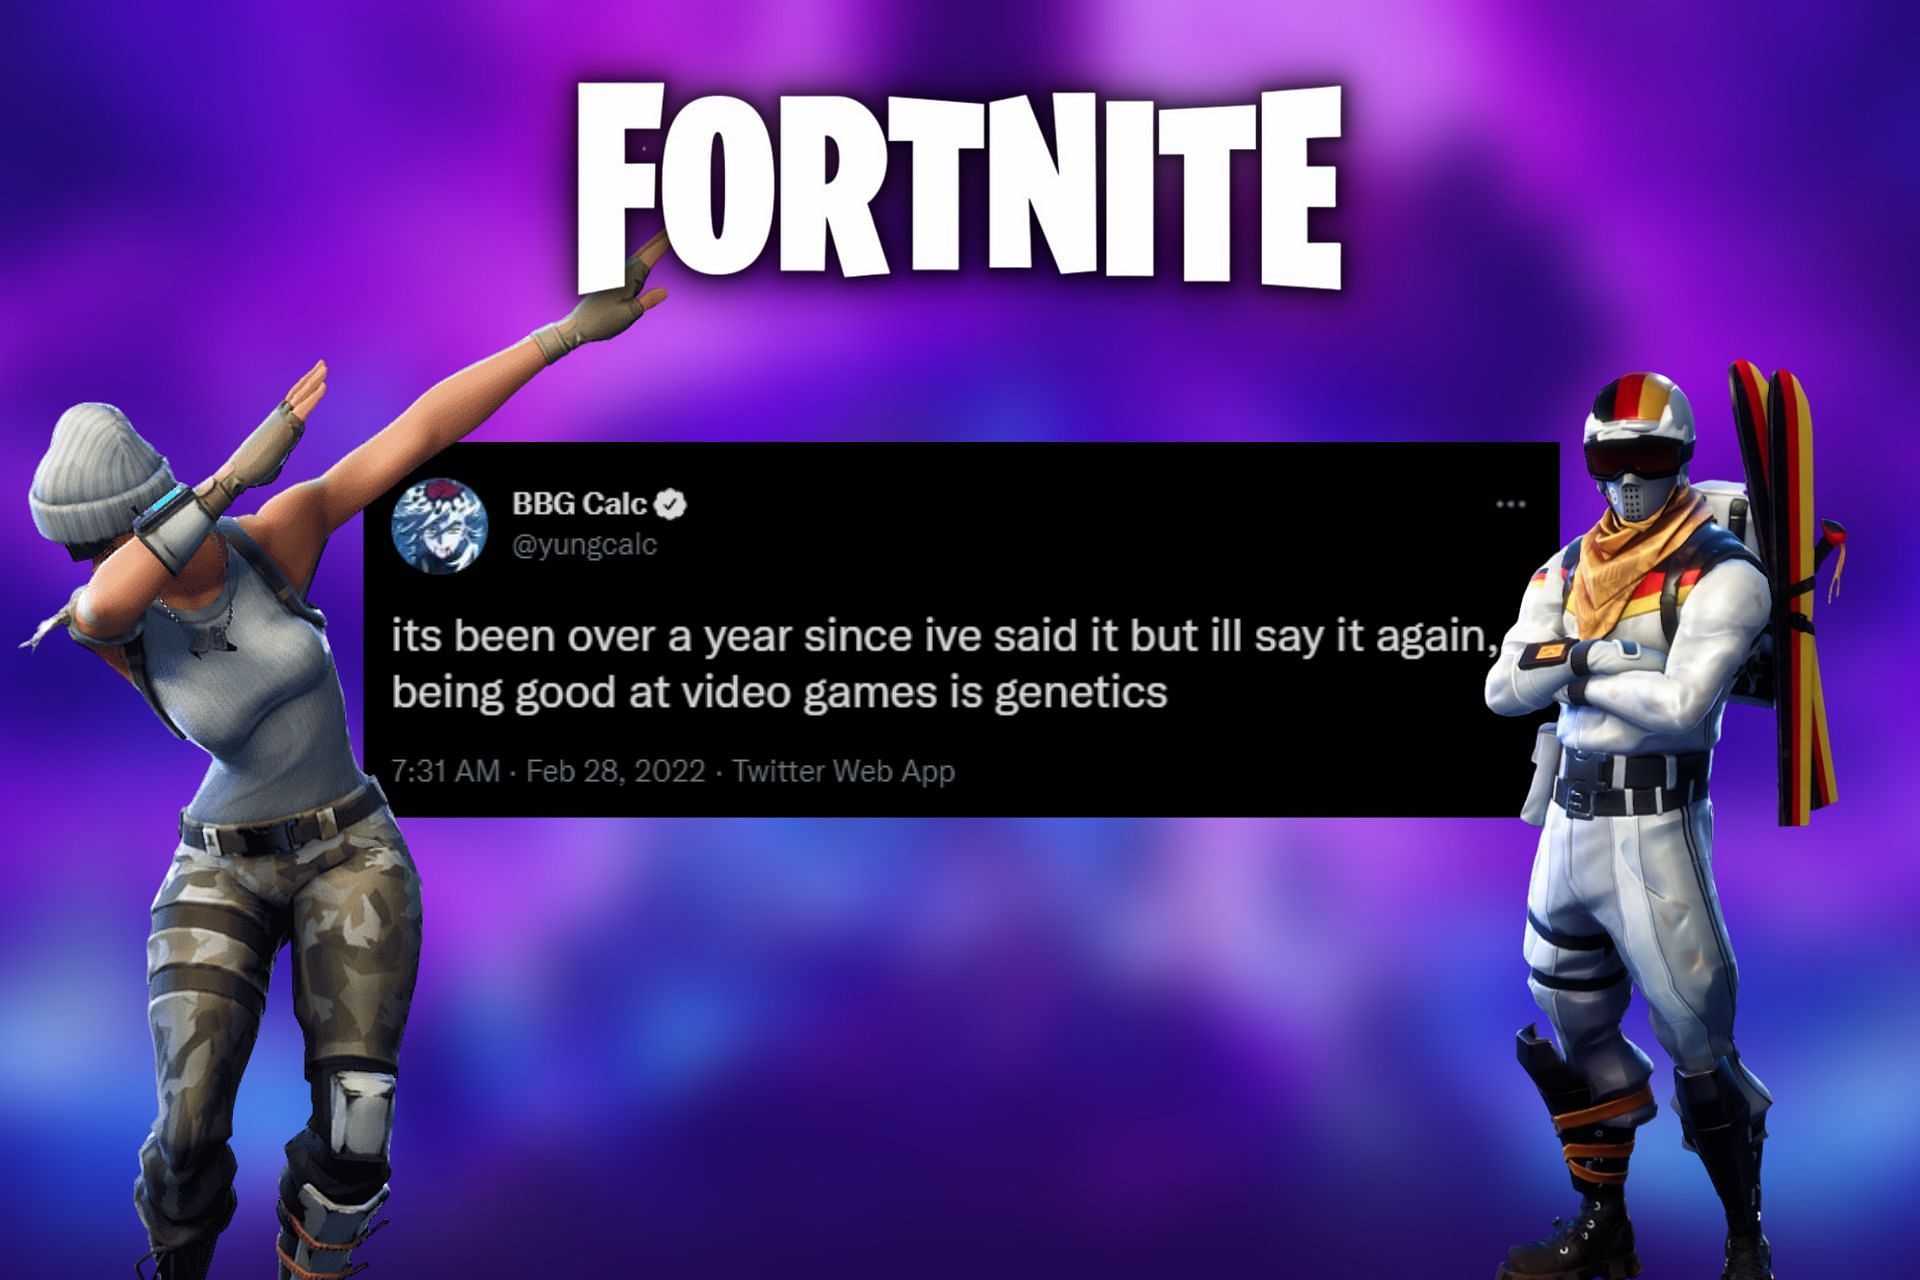 Fortnite pro creates controversy by linking games with genetics (Image via Sportskeeda)